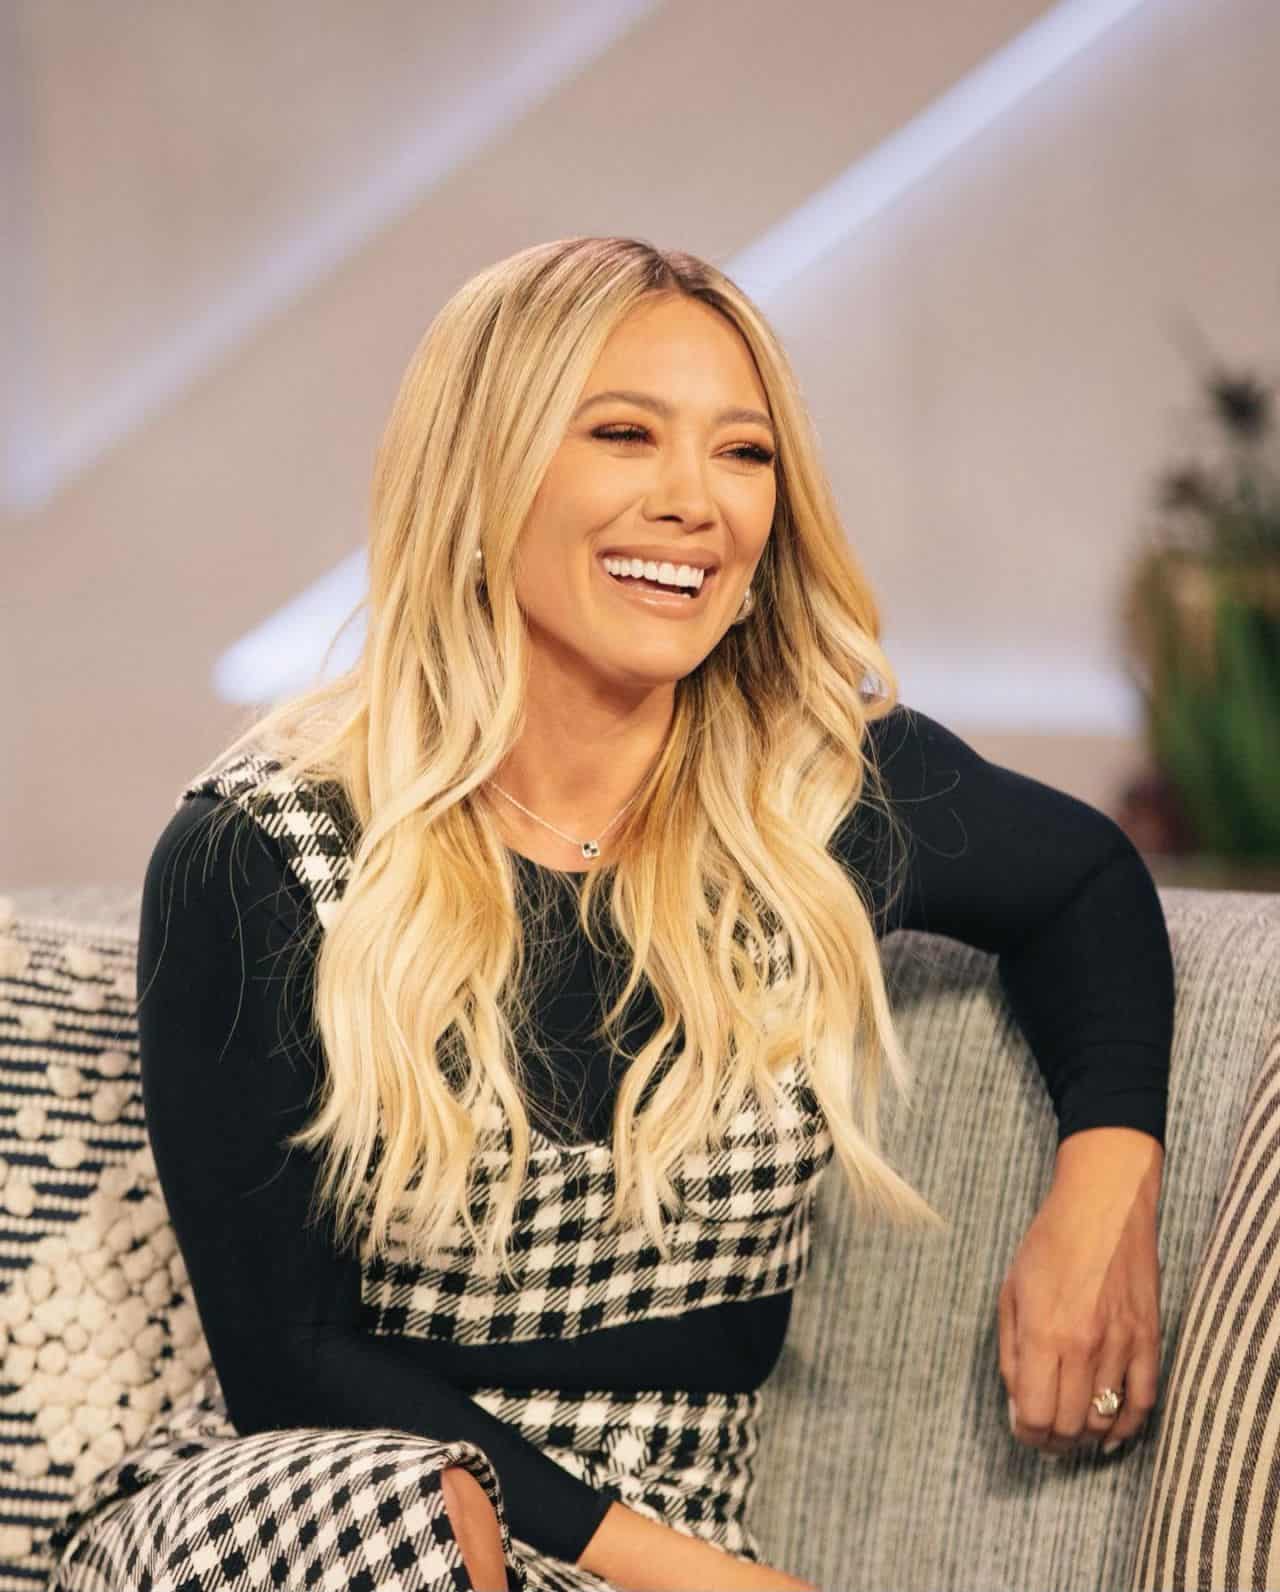 Hilary Duff Wowed Everyone with Her Wide Smile on The Kelly Clarkson Show